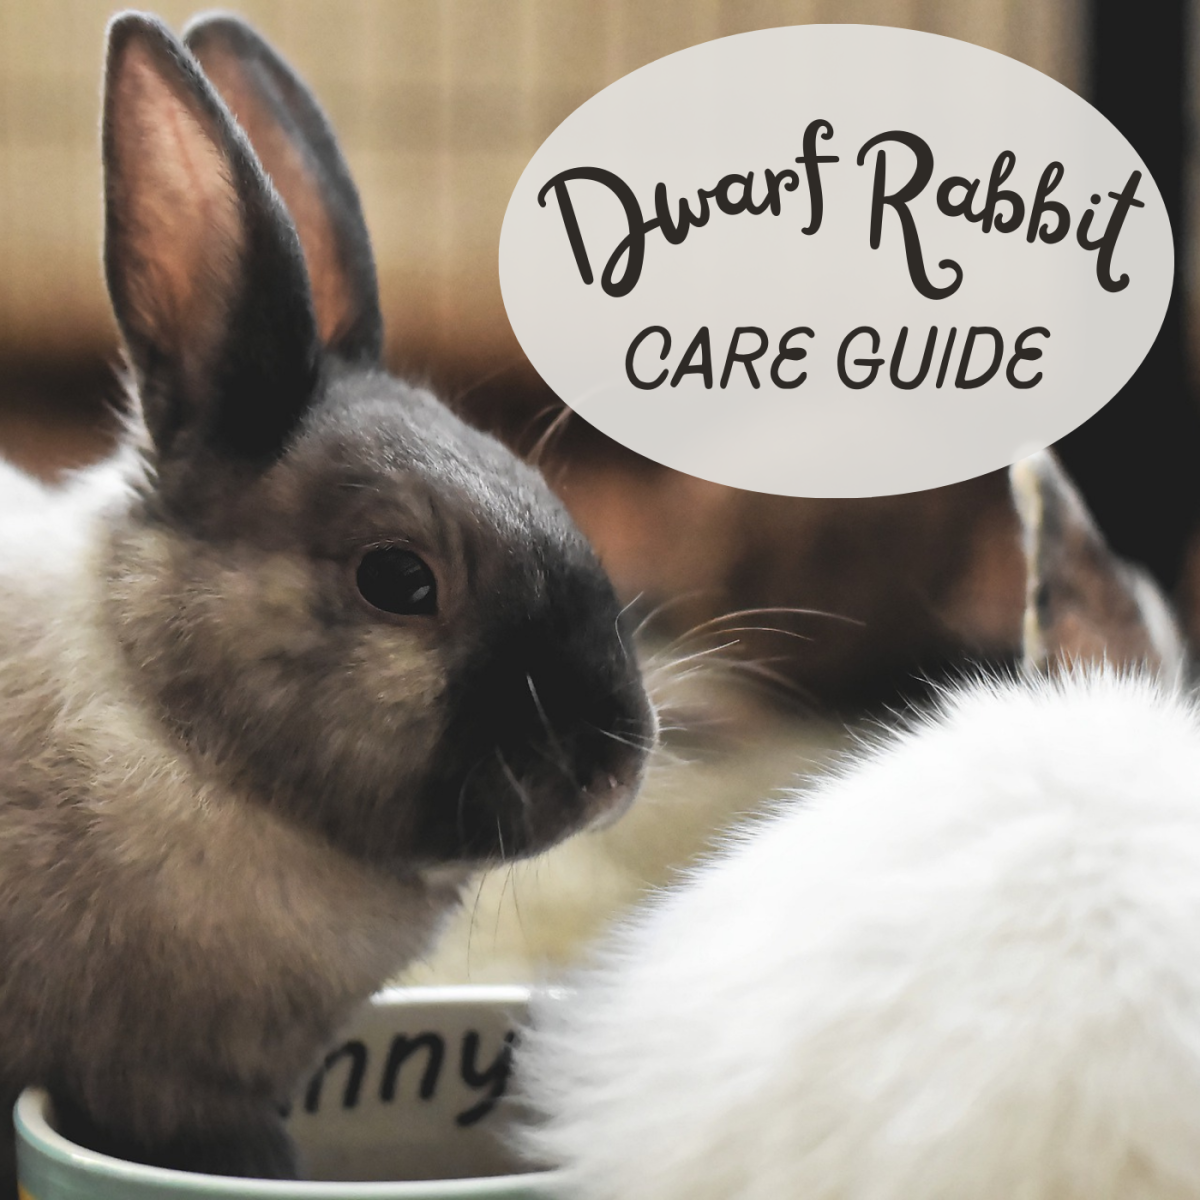 What Are Dwarf Rabbits?